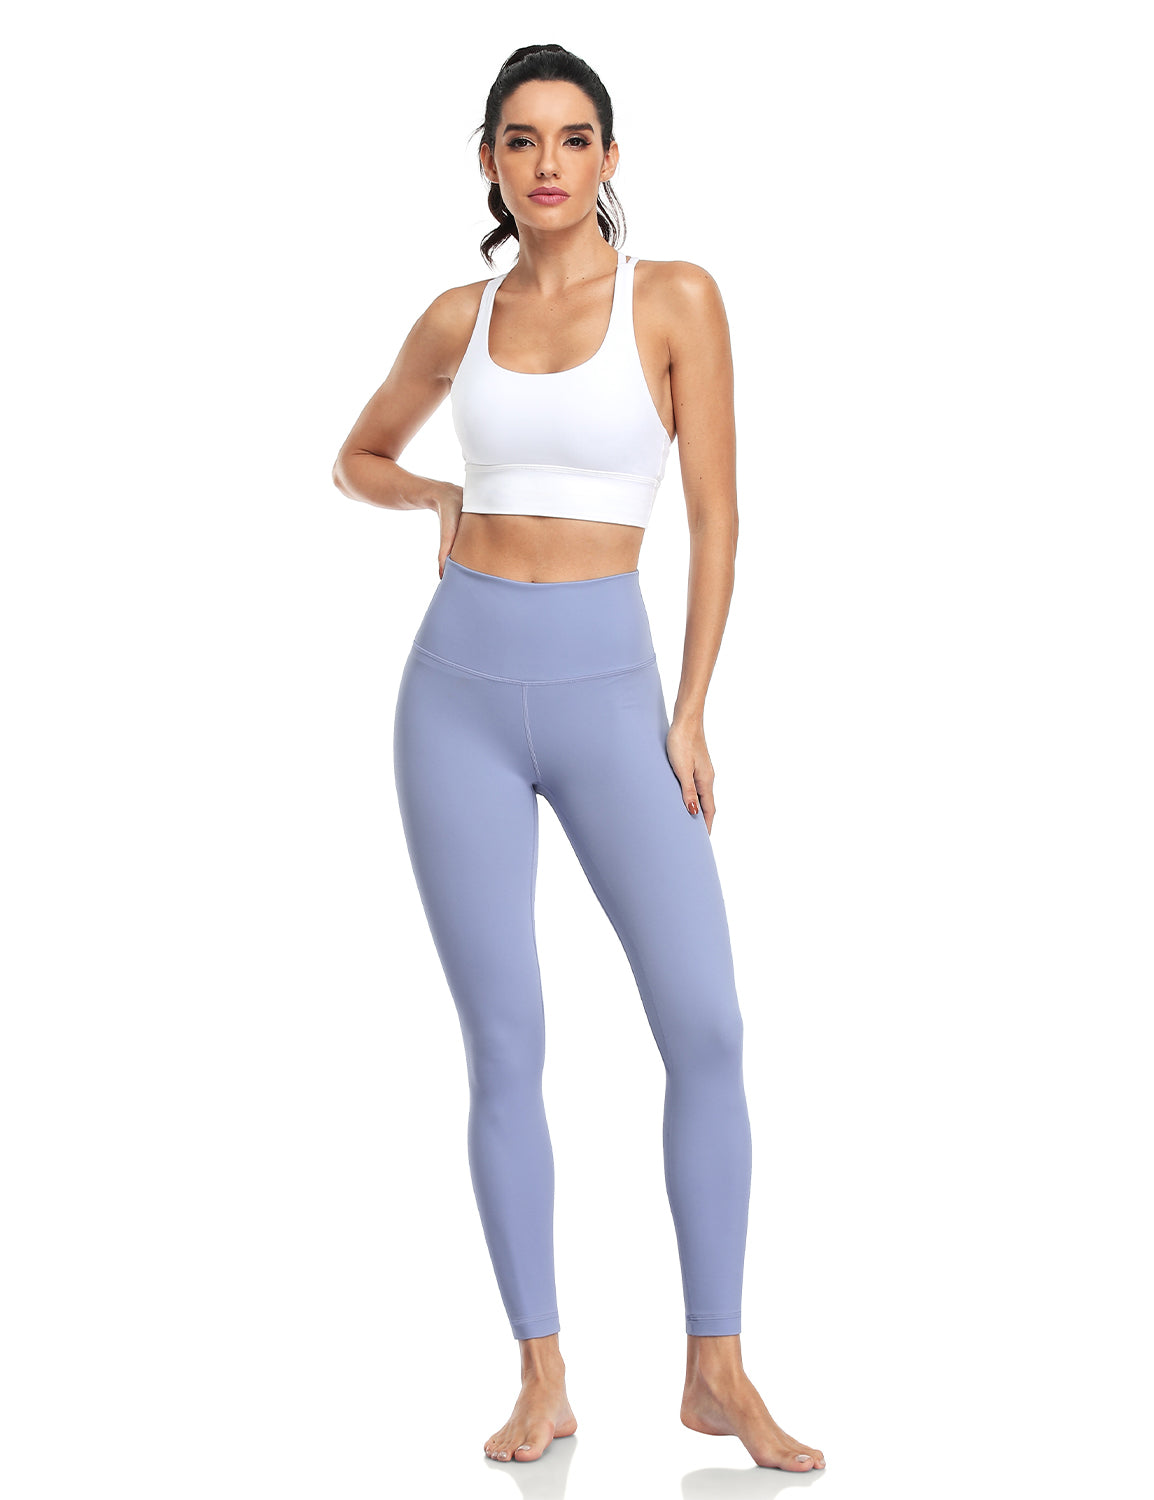 HeyNuts Hawthorn Athletic Women's Essential High Waisted Yoga Leggings 7/8  Length Workout Pants with Side Pockets 25'', True Navy_25'' Ⅱ, XX-Small :  Buy Online at Best Price in KSA - Souq is